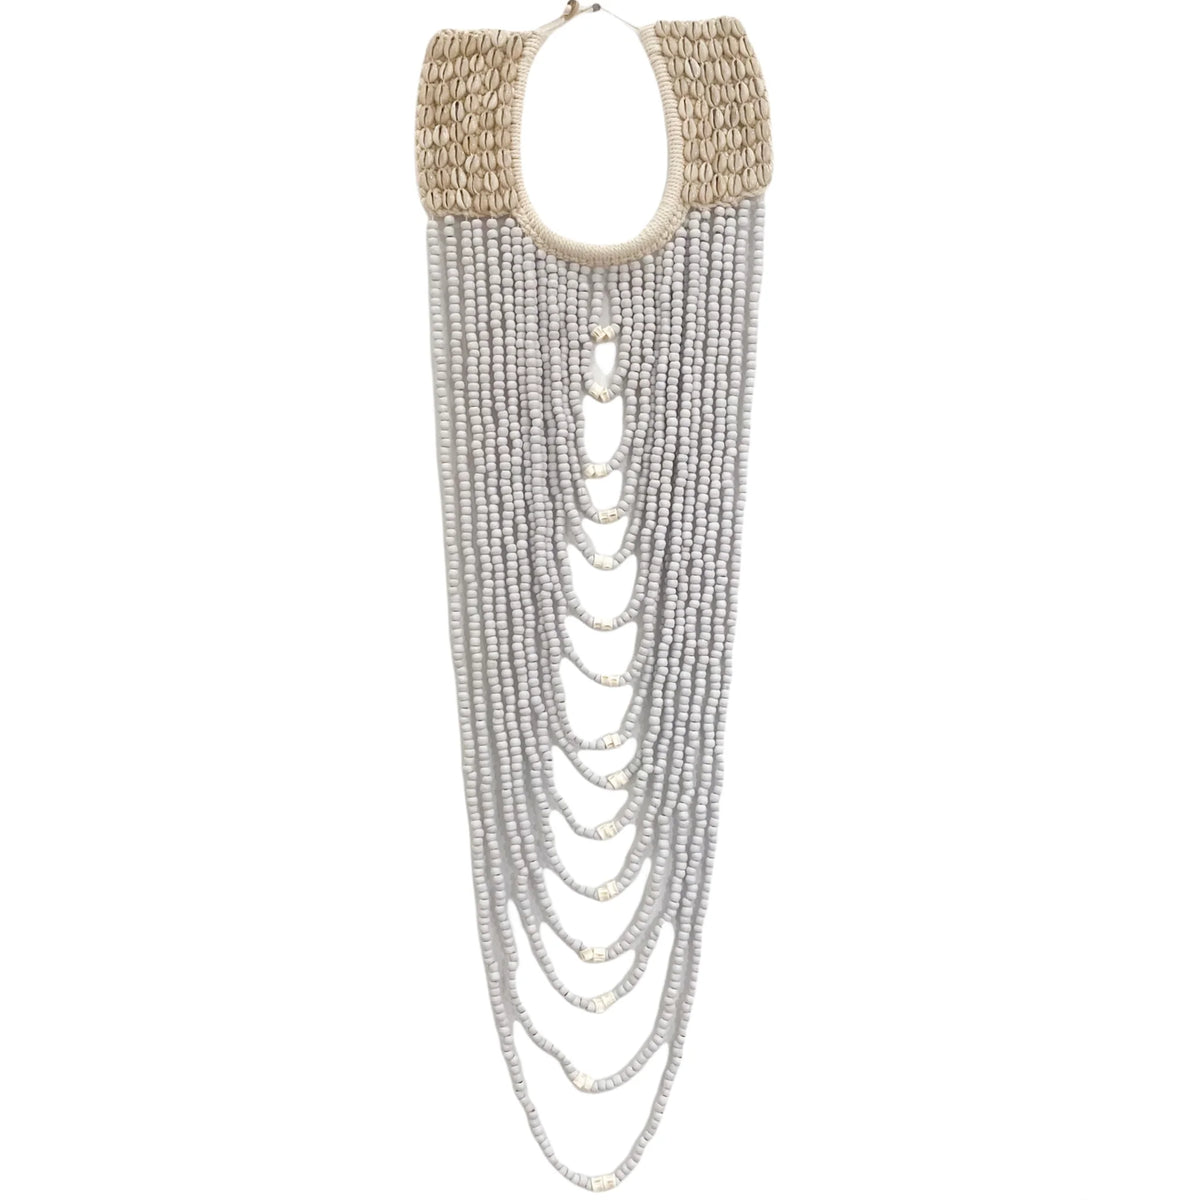 Cascade Necklace Hanging - White